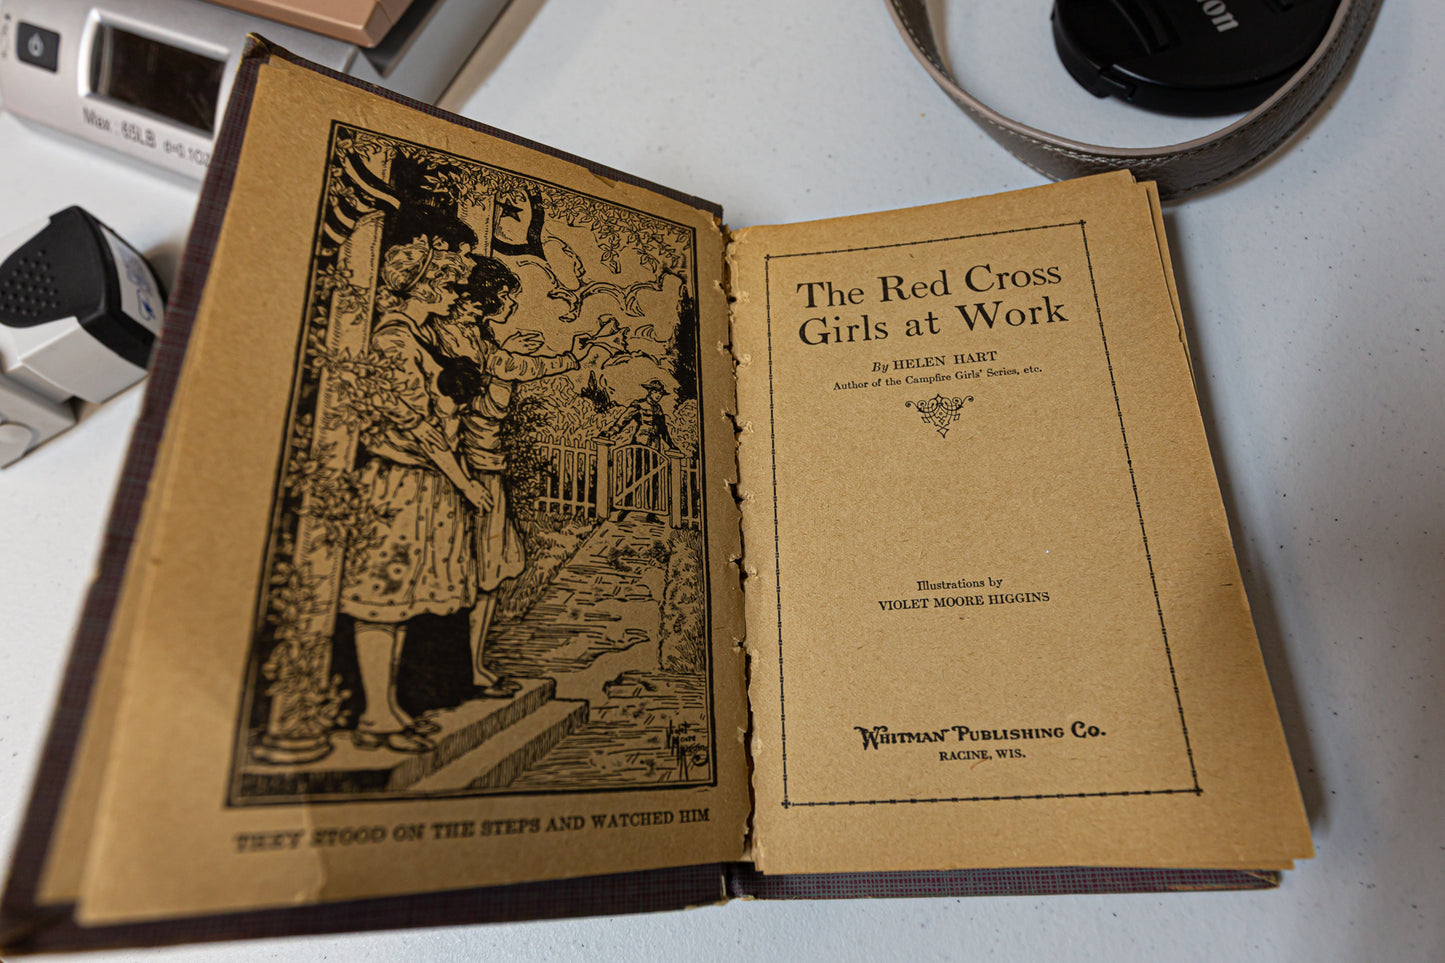 The Red Cross Girls at Work by Helen Hart Hardcover First Edition, Copyright 1917